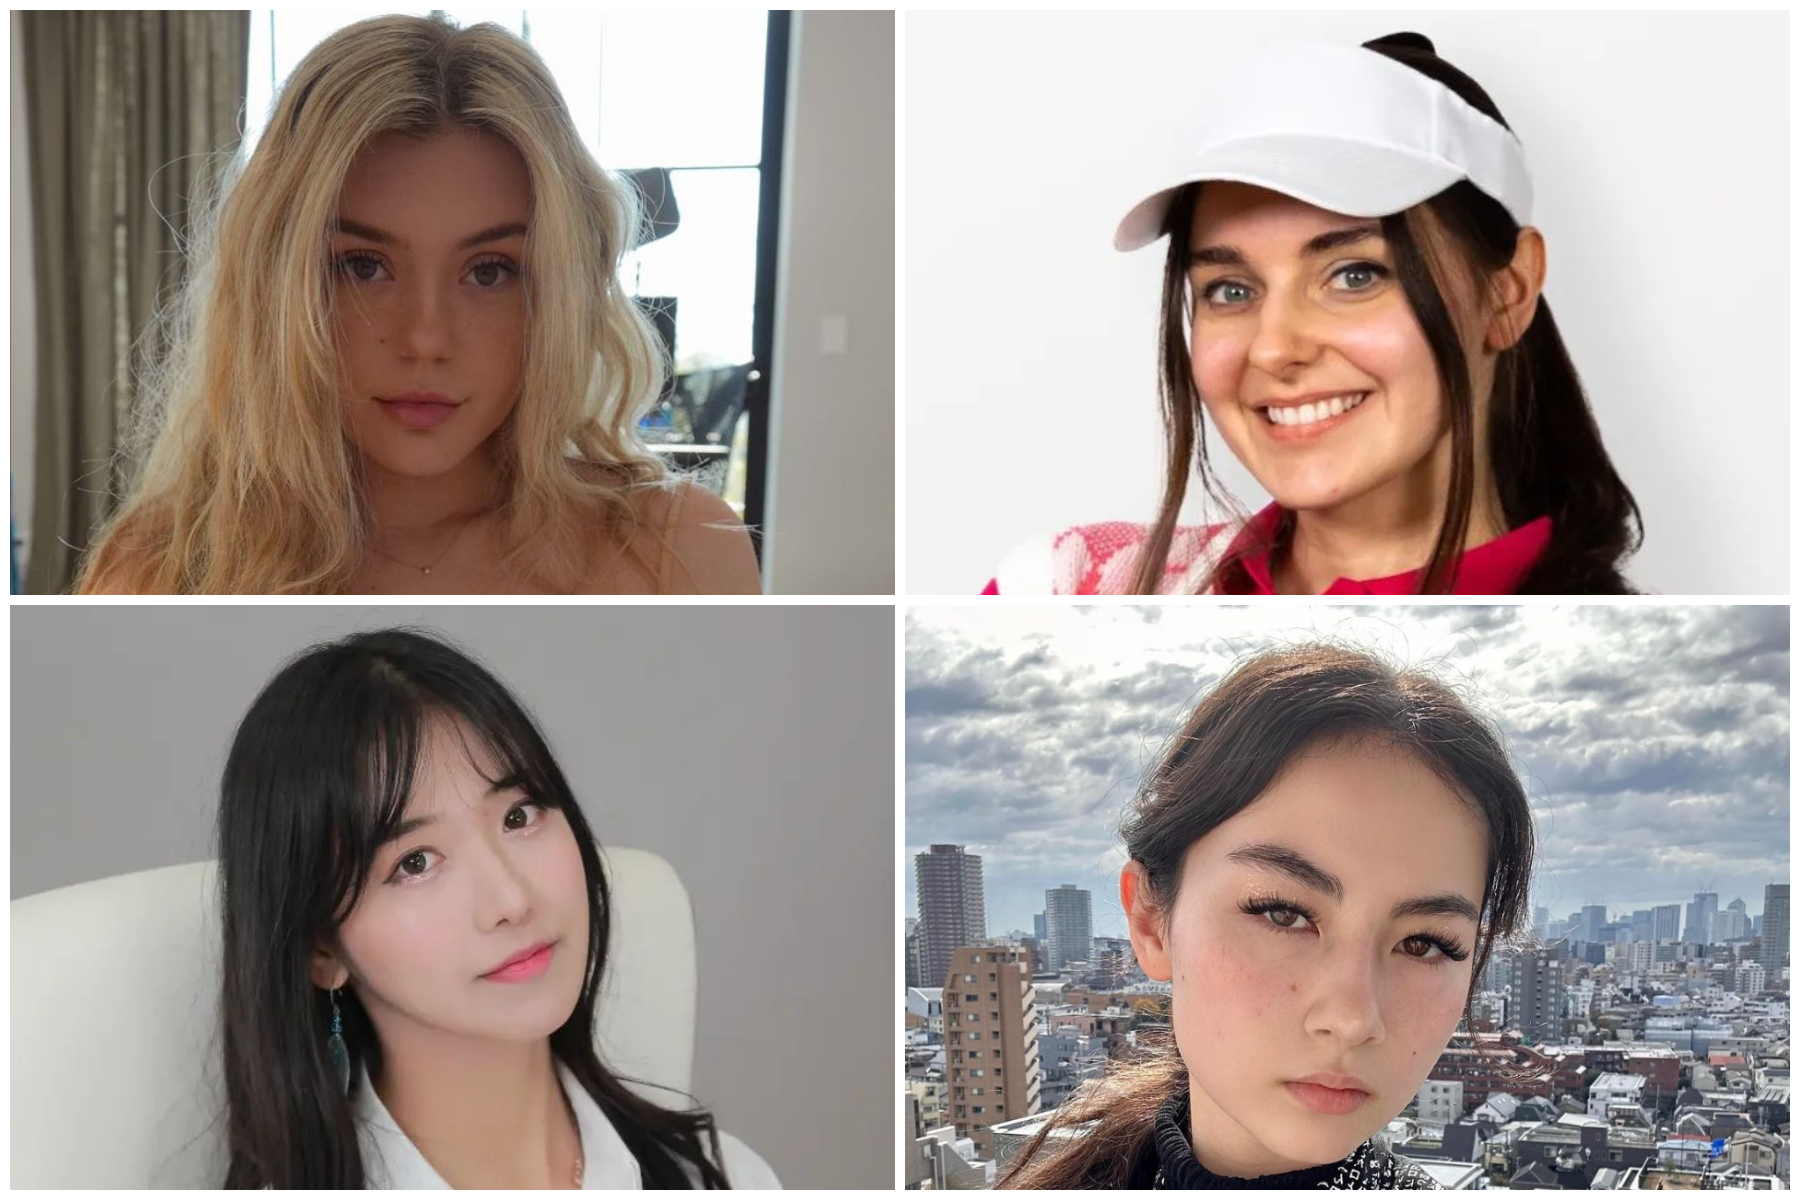 Female Twitch streamers: 15 of the most watched right now